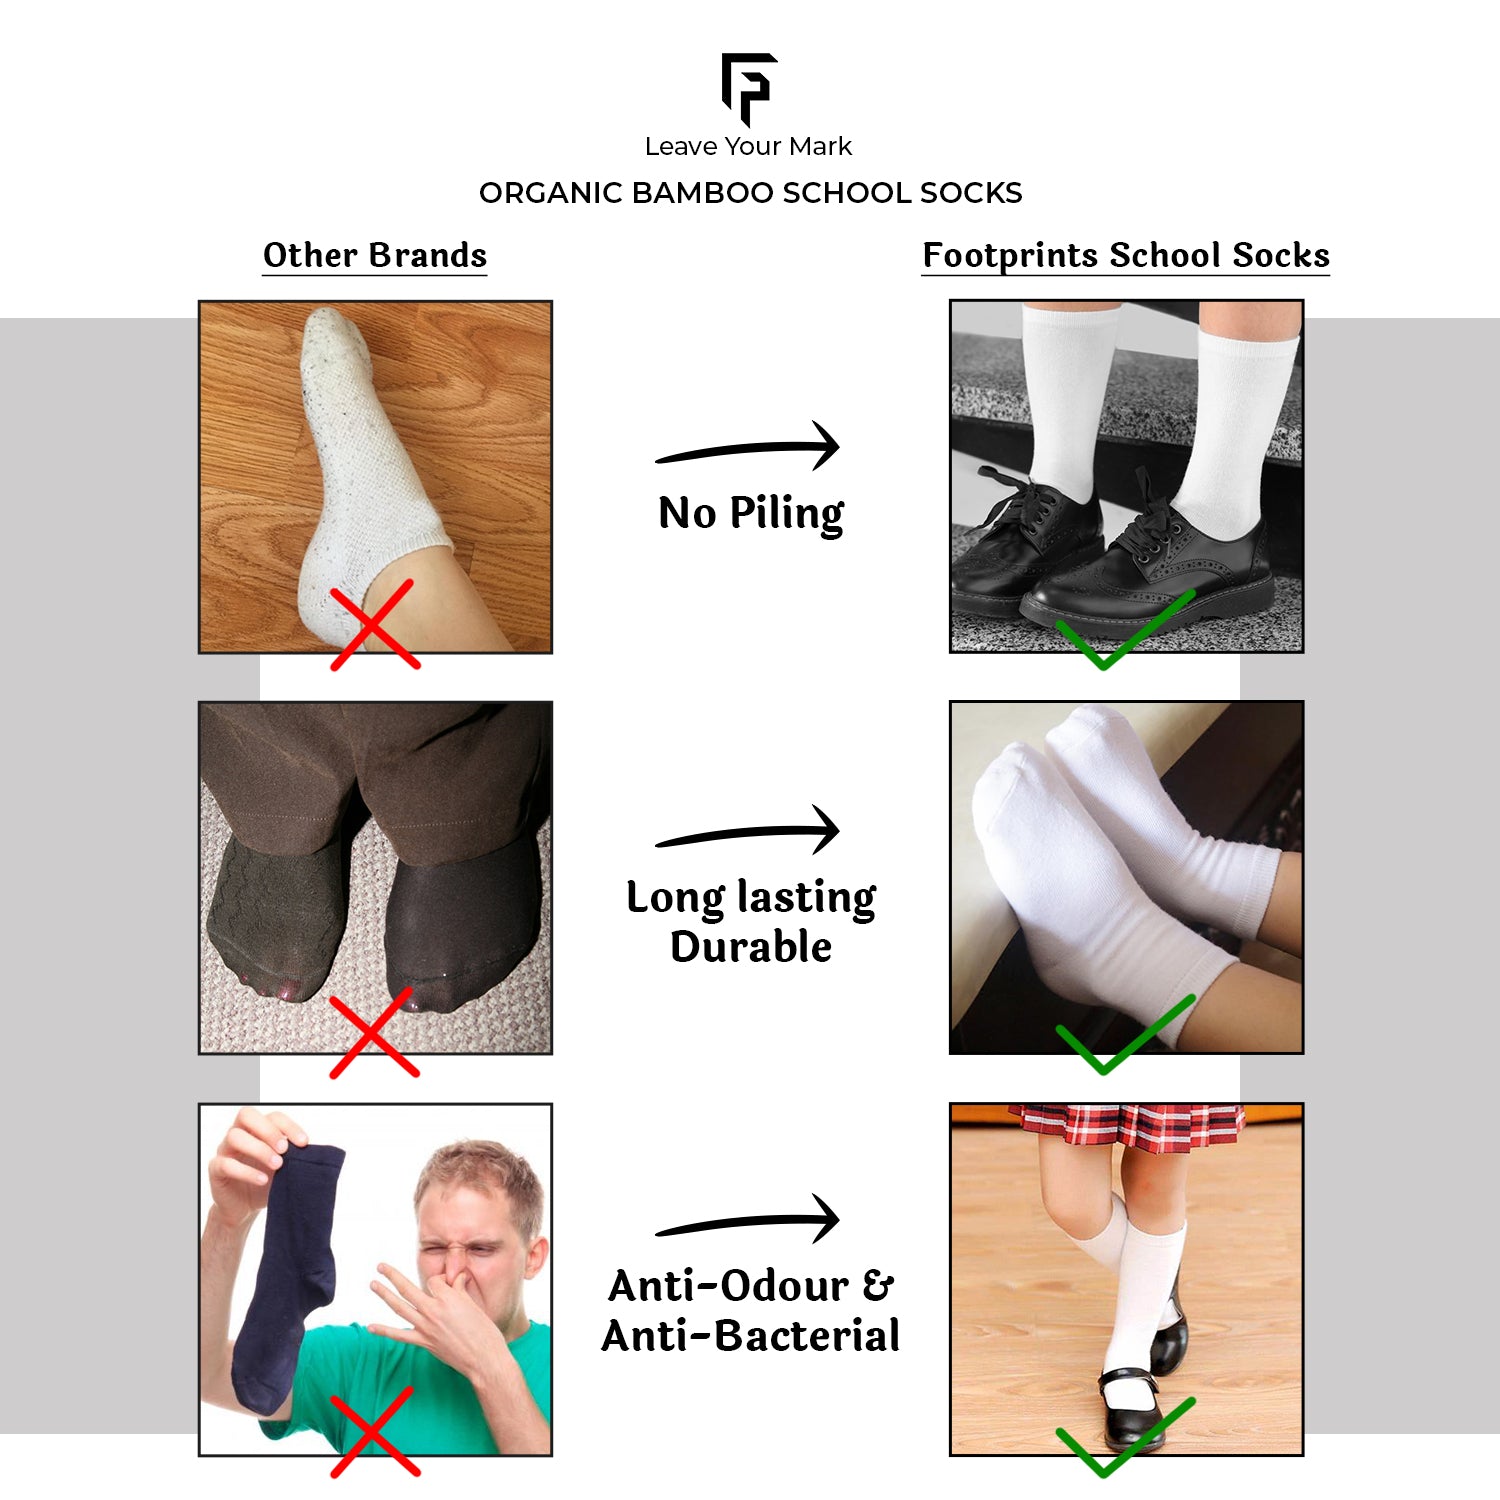 Kids Organic Cotton School Socks - Unisex - Calf length- Pack of 5 (White)- Extra soft and Breathable